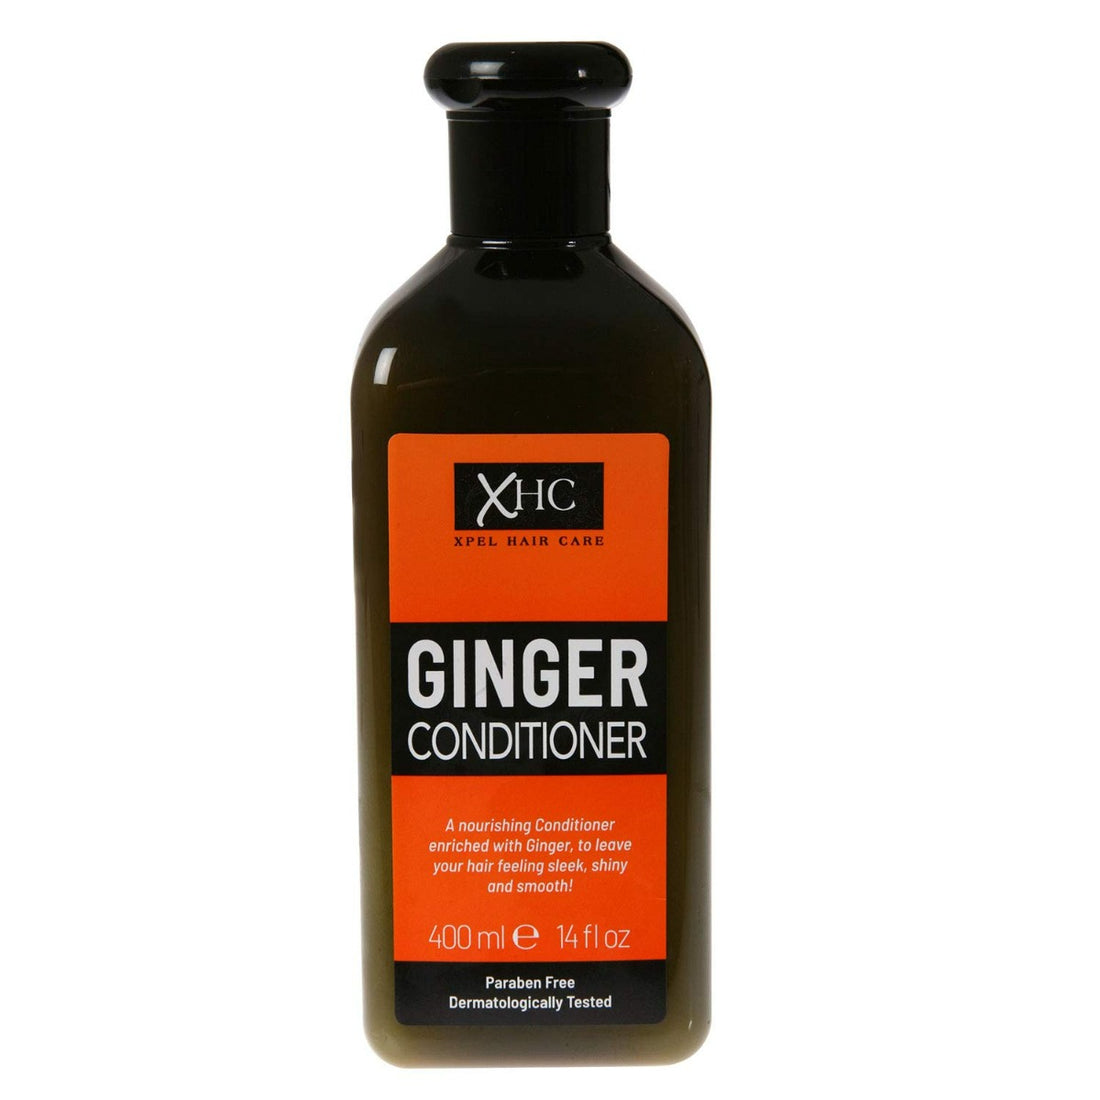 XHC Xpel Hair Care Ginger Conditioner (400ml)